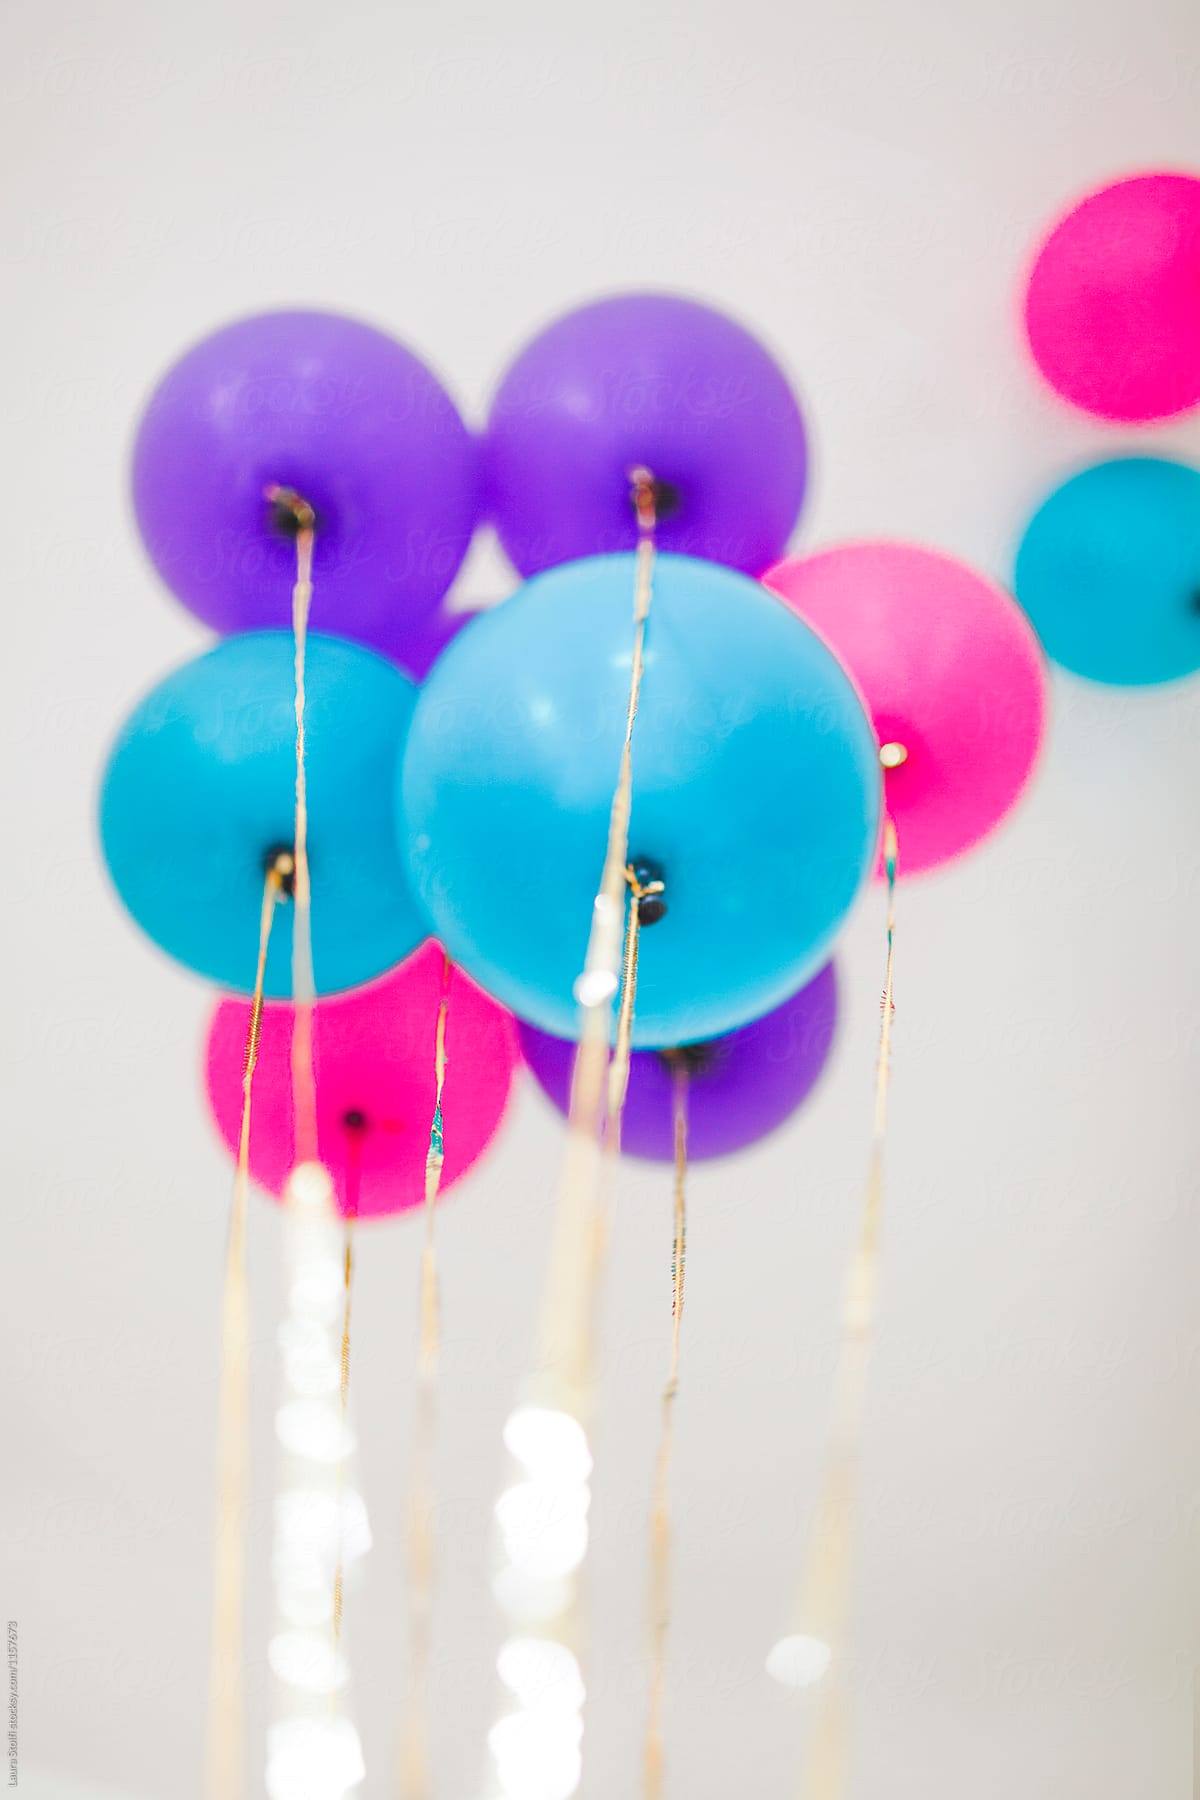 Flying Balloons And Gold Strings by Stocksy Contributor Laura Stolfi -  Stocksy